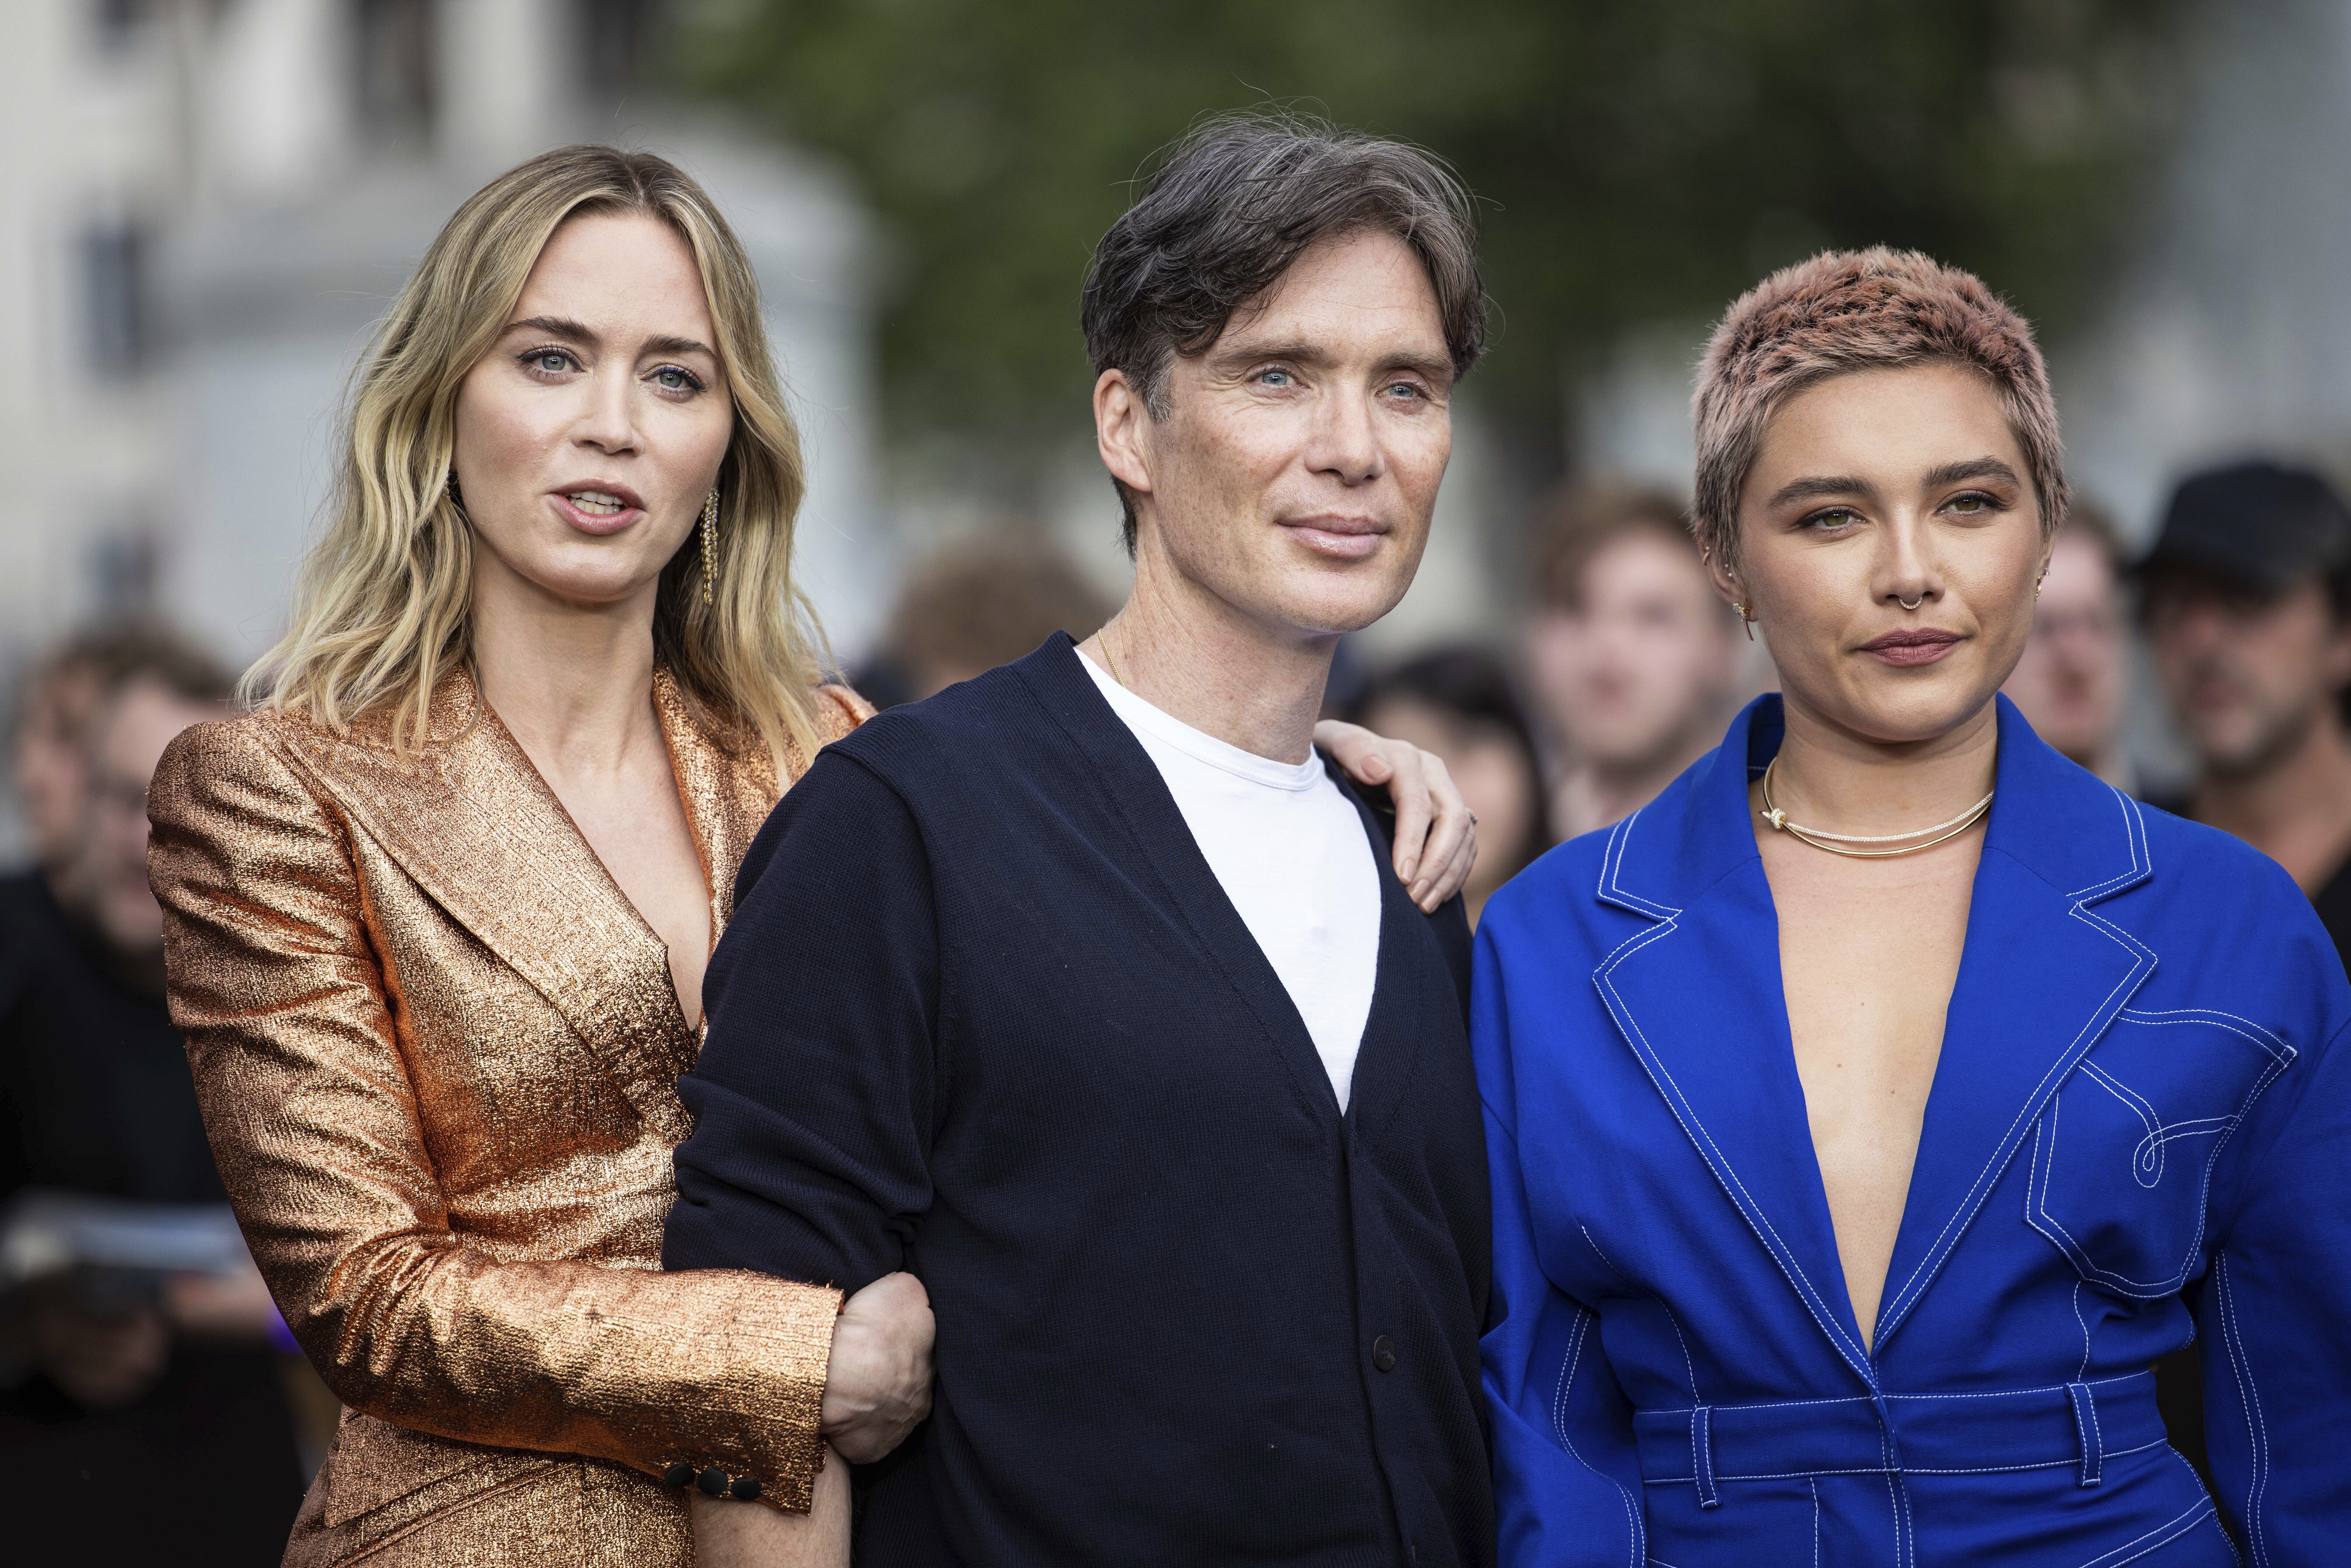 Cillian Murphy, Emily Blunt and Florence Pugh pose for photographers at the photo call for the film 'Oppenheimer' on Wednesday, July 12, 2023 in London. (Vianney Le Caer/Invision/AP)